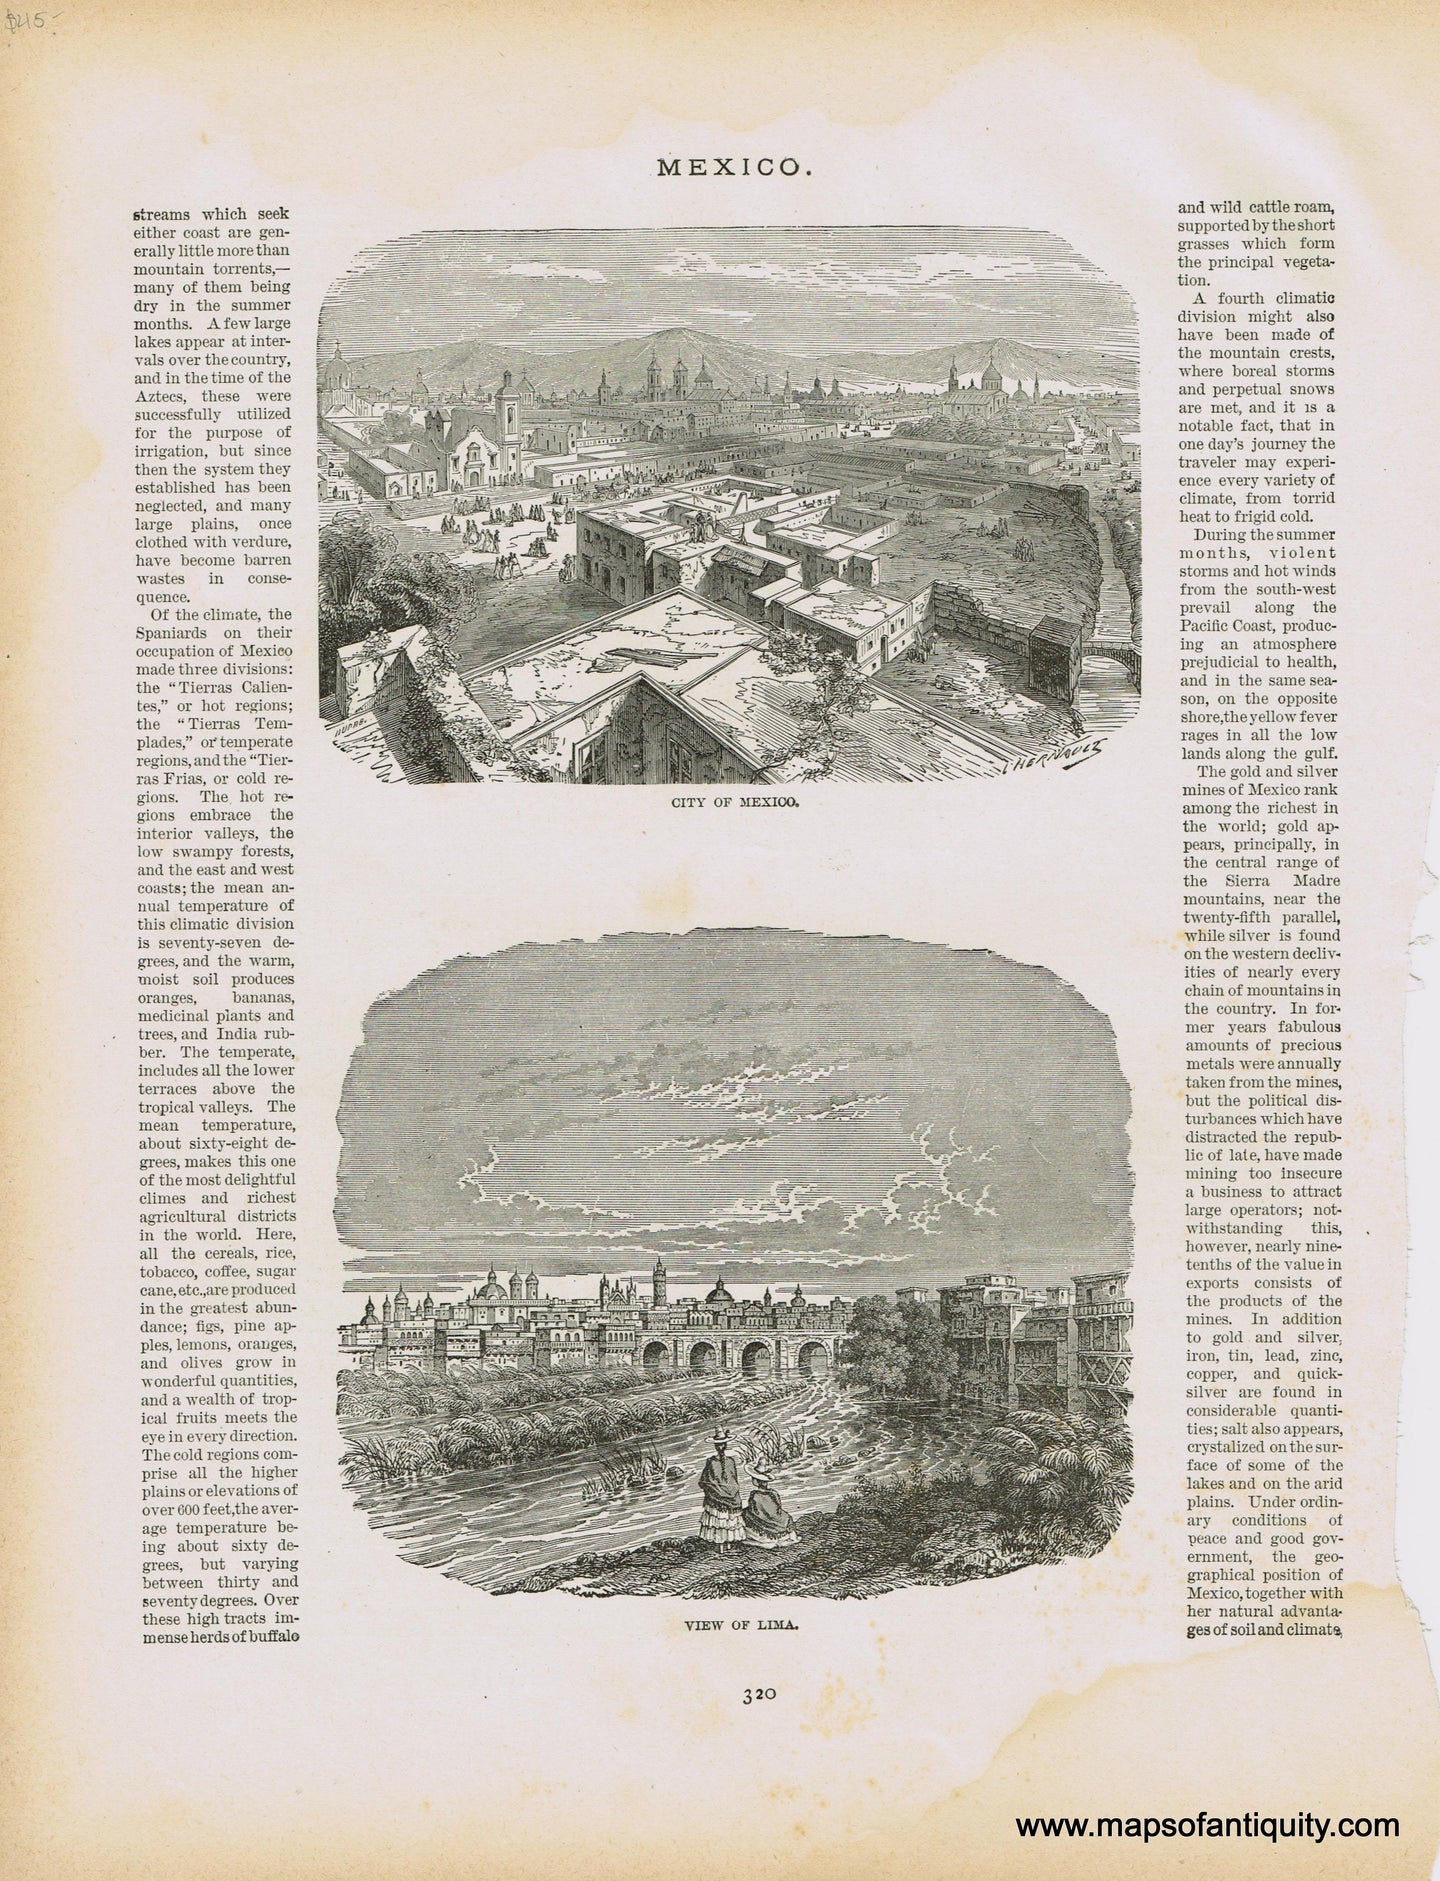 Genuine-Antique-Print-City-of-Mexico-View-of-Lima--1890-Publication-Unknown-Maps-Of-Antiquity